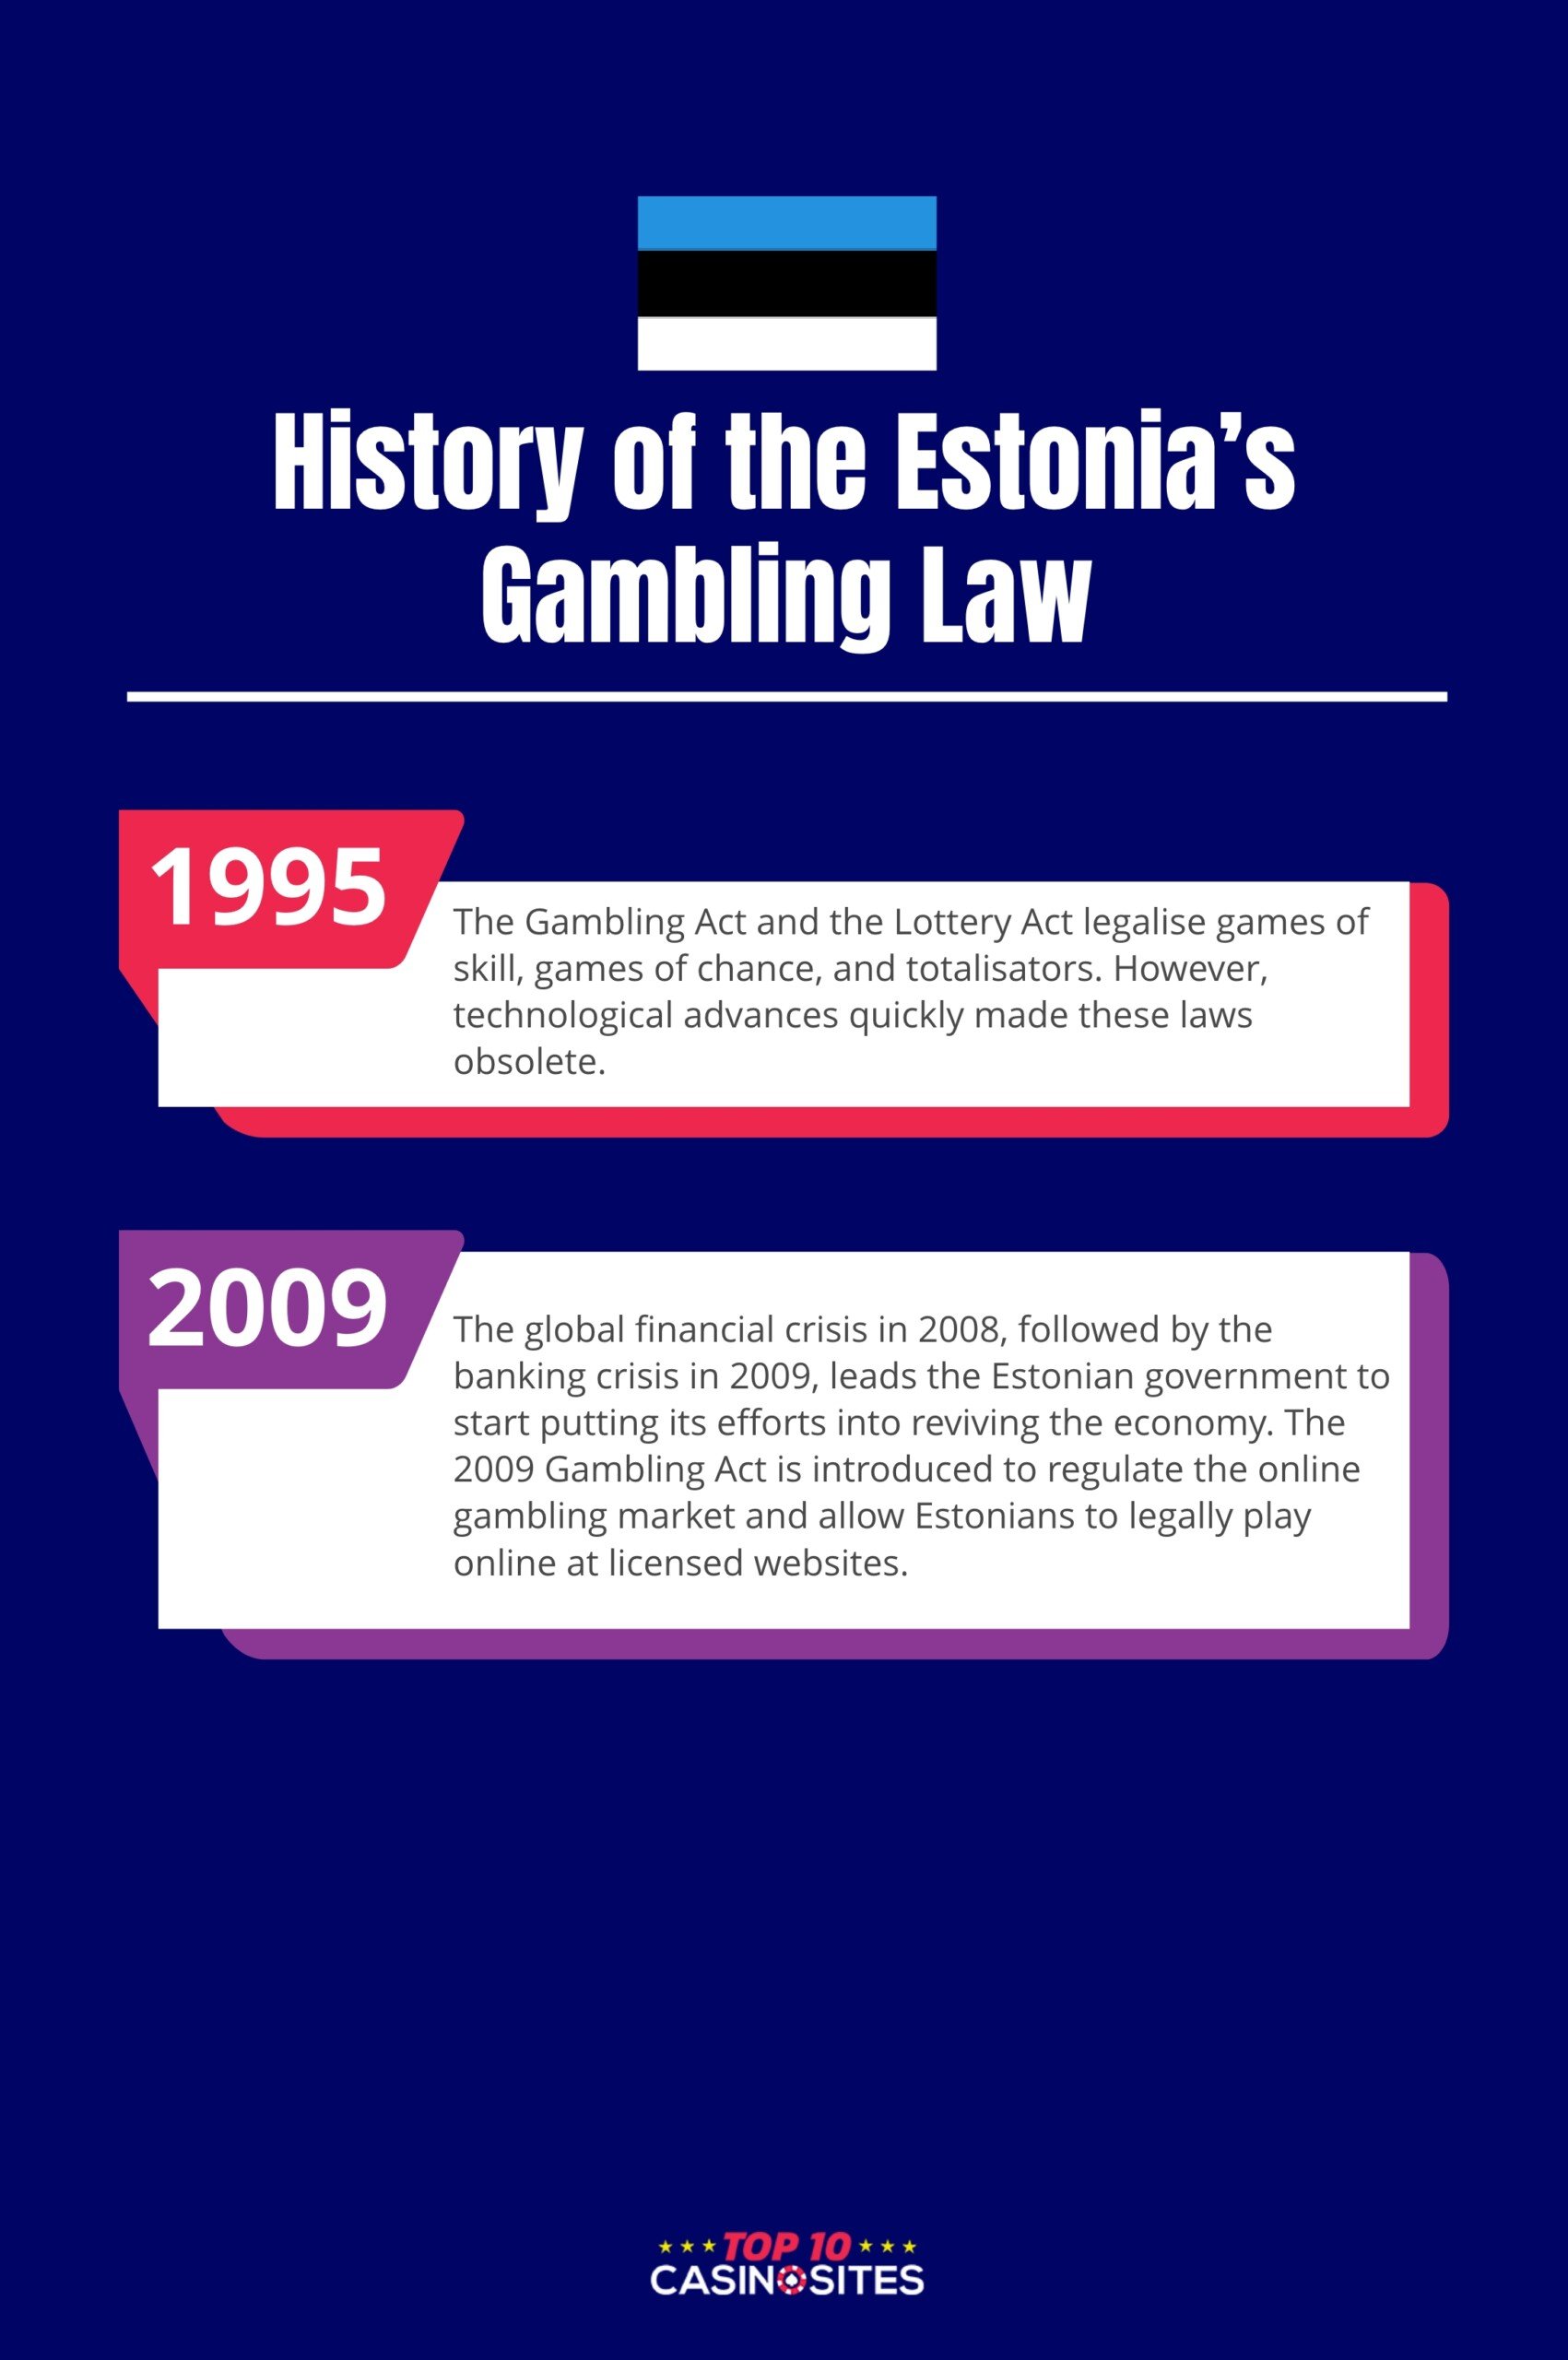 An infographic of the history of Estonia's Gambling Law